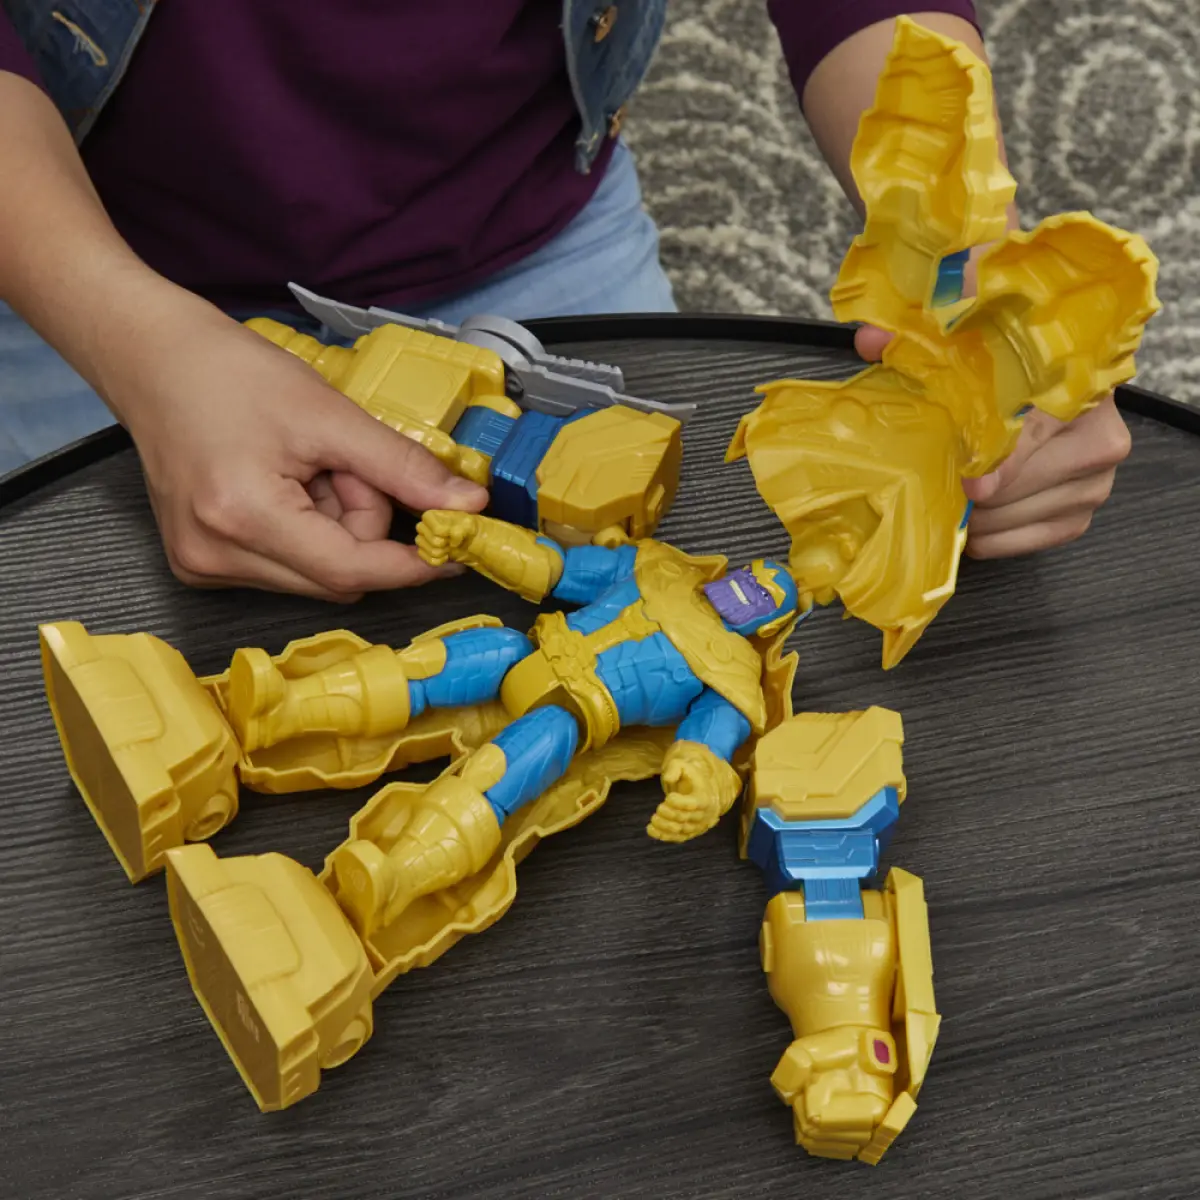 Hasbro Marvel Avengers Mech Strike 7-Inch Action Figure Toy Infinity Mech Suit Thanos And Blade Weapon Accessory, For Kids Ages 4 And Up